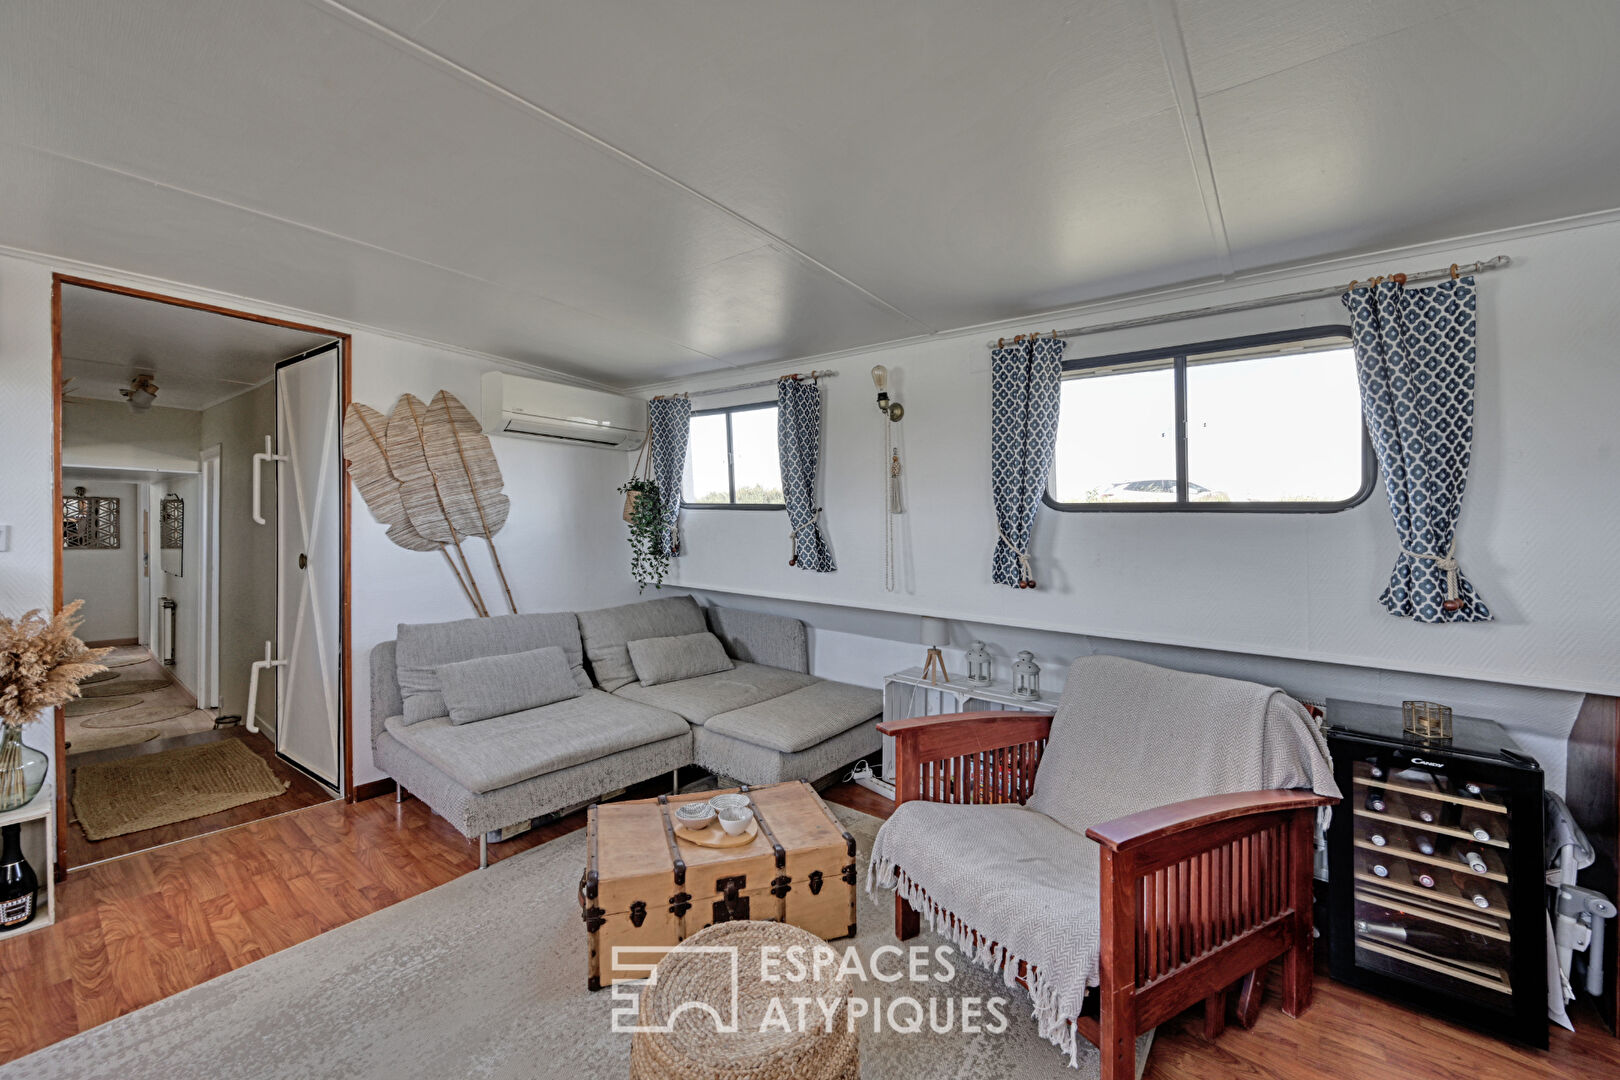 Completely renovated Dutch barge